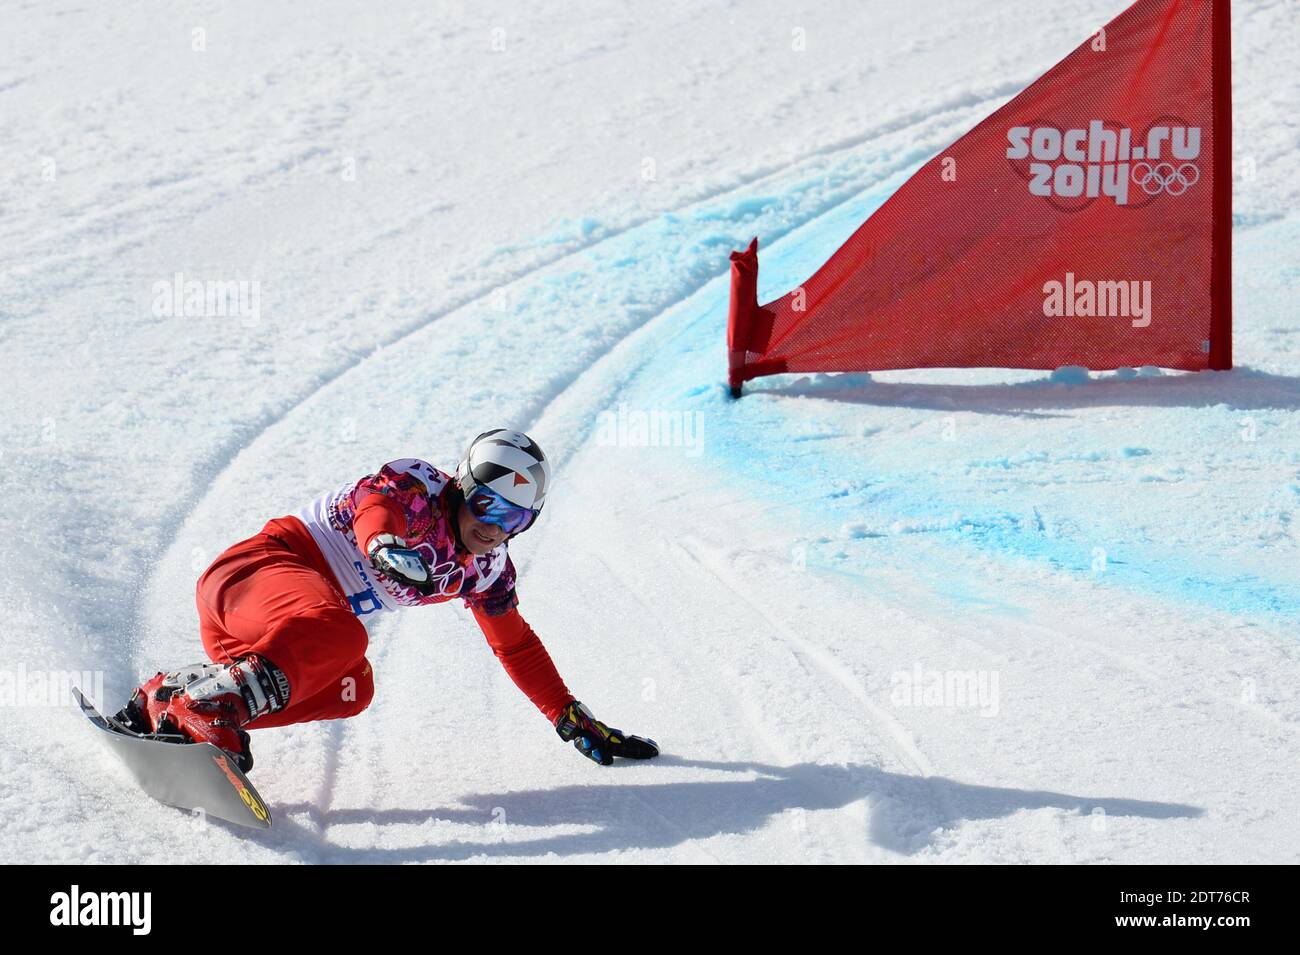 Switzerland's Nevin Galmarini wins the silver medal on men's Parallel Giant Slalom at Rosa Khutor Extreme Park during the Sochi 2014 Winter Olympics on February 19, 2014 in Sochi, Russia. Photo by Gouhier-Zabulon/ABACAPRESS.COM Stock Photo